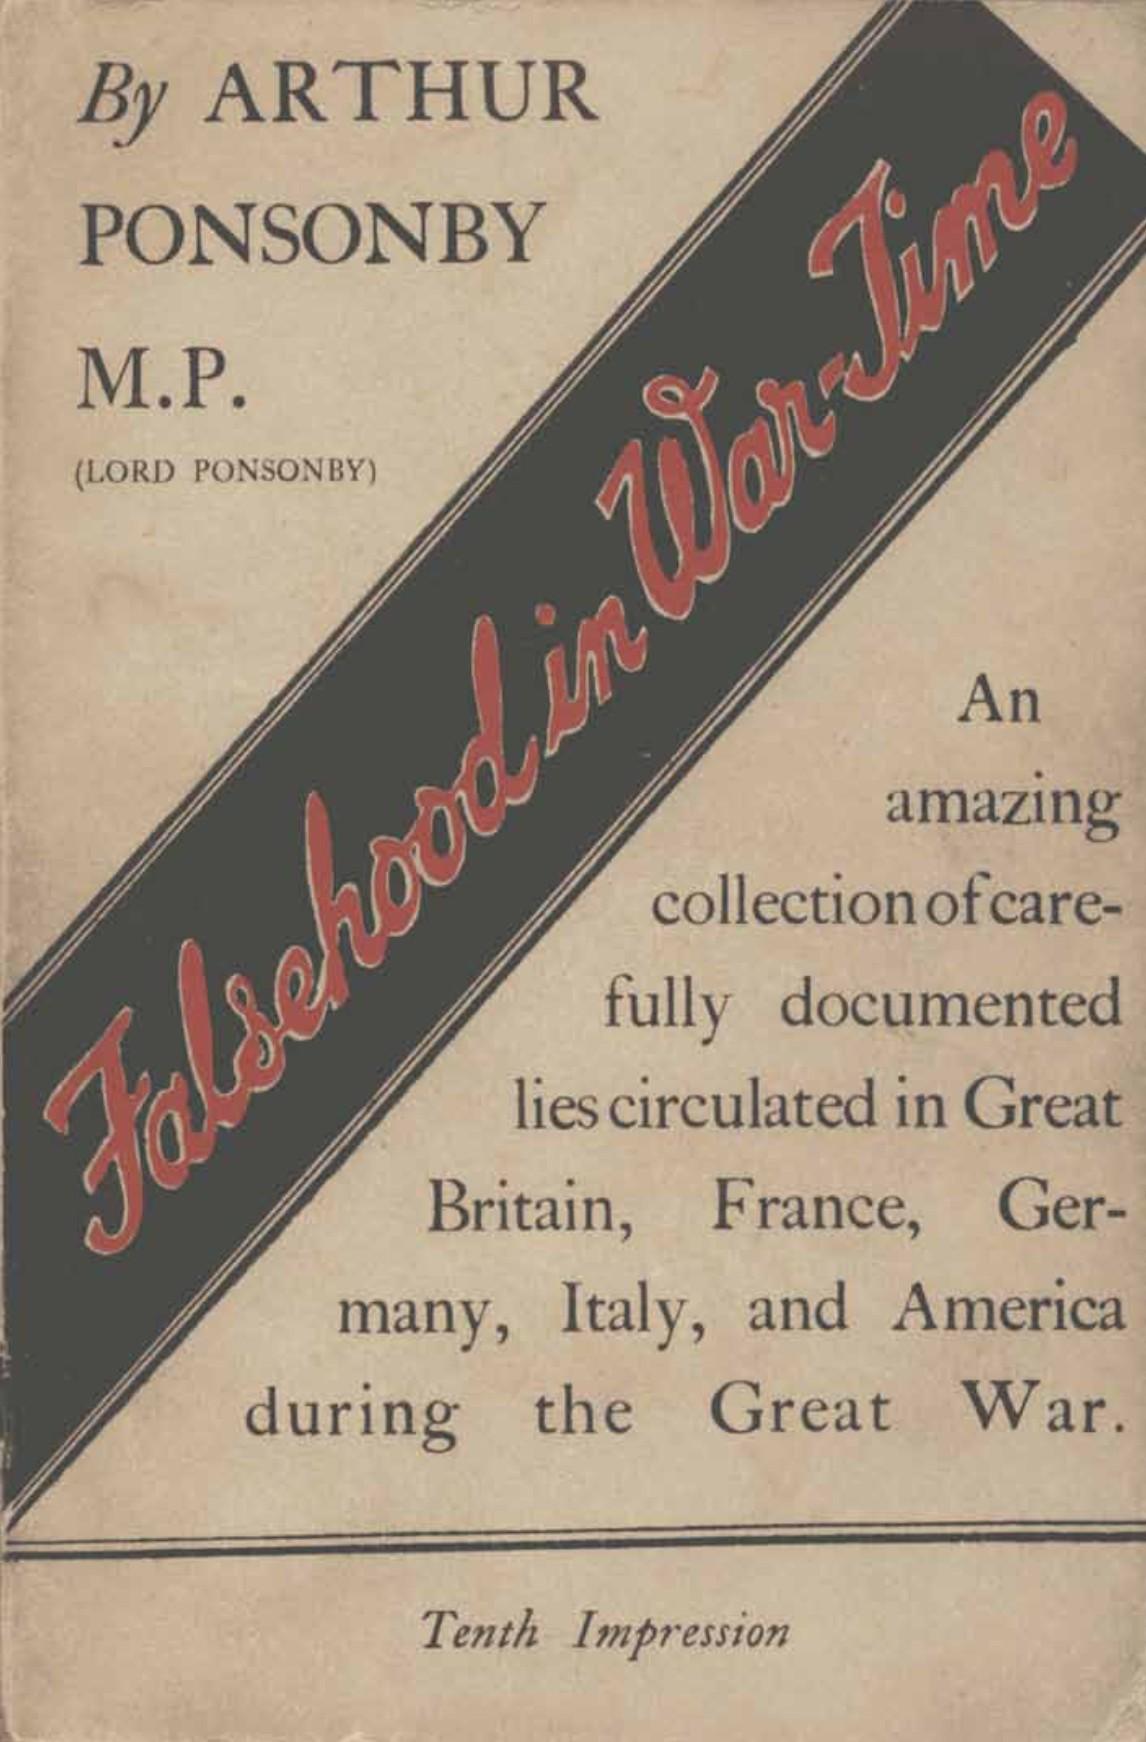 Falsehood in War Time: Containing an Assortment of Lies Circulated Throughout the Nations During the Great War (1928) by Arthur Ponsonby